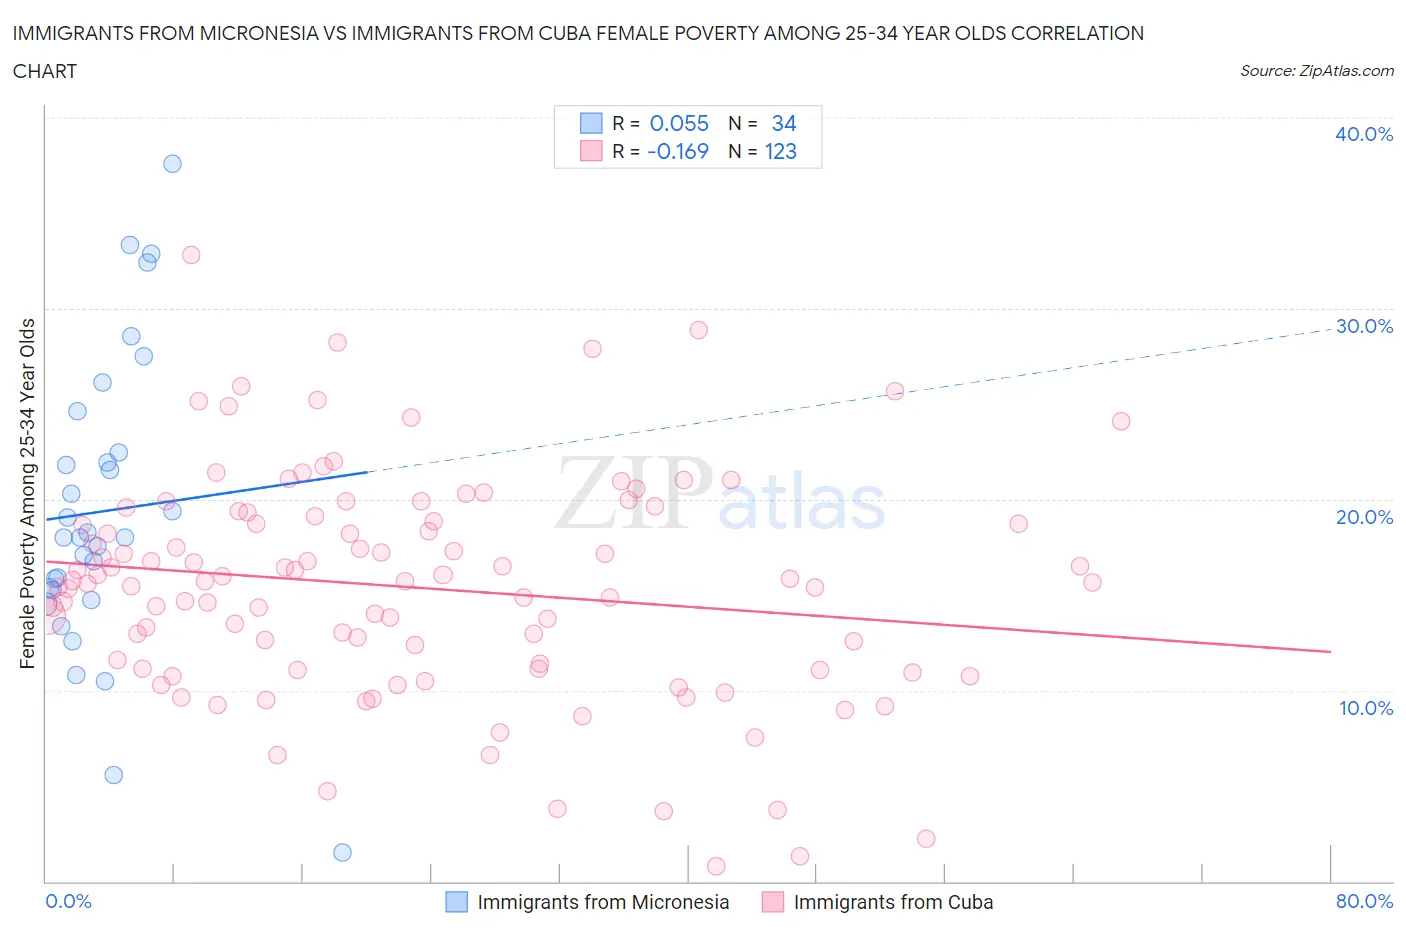 Immigrants from Micronesia vs Immigrants from Cuba Female Poverty Among 25-34 Year Olds